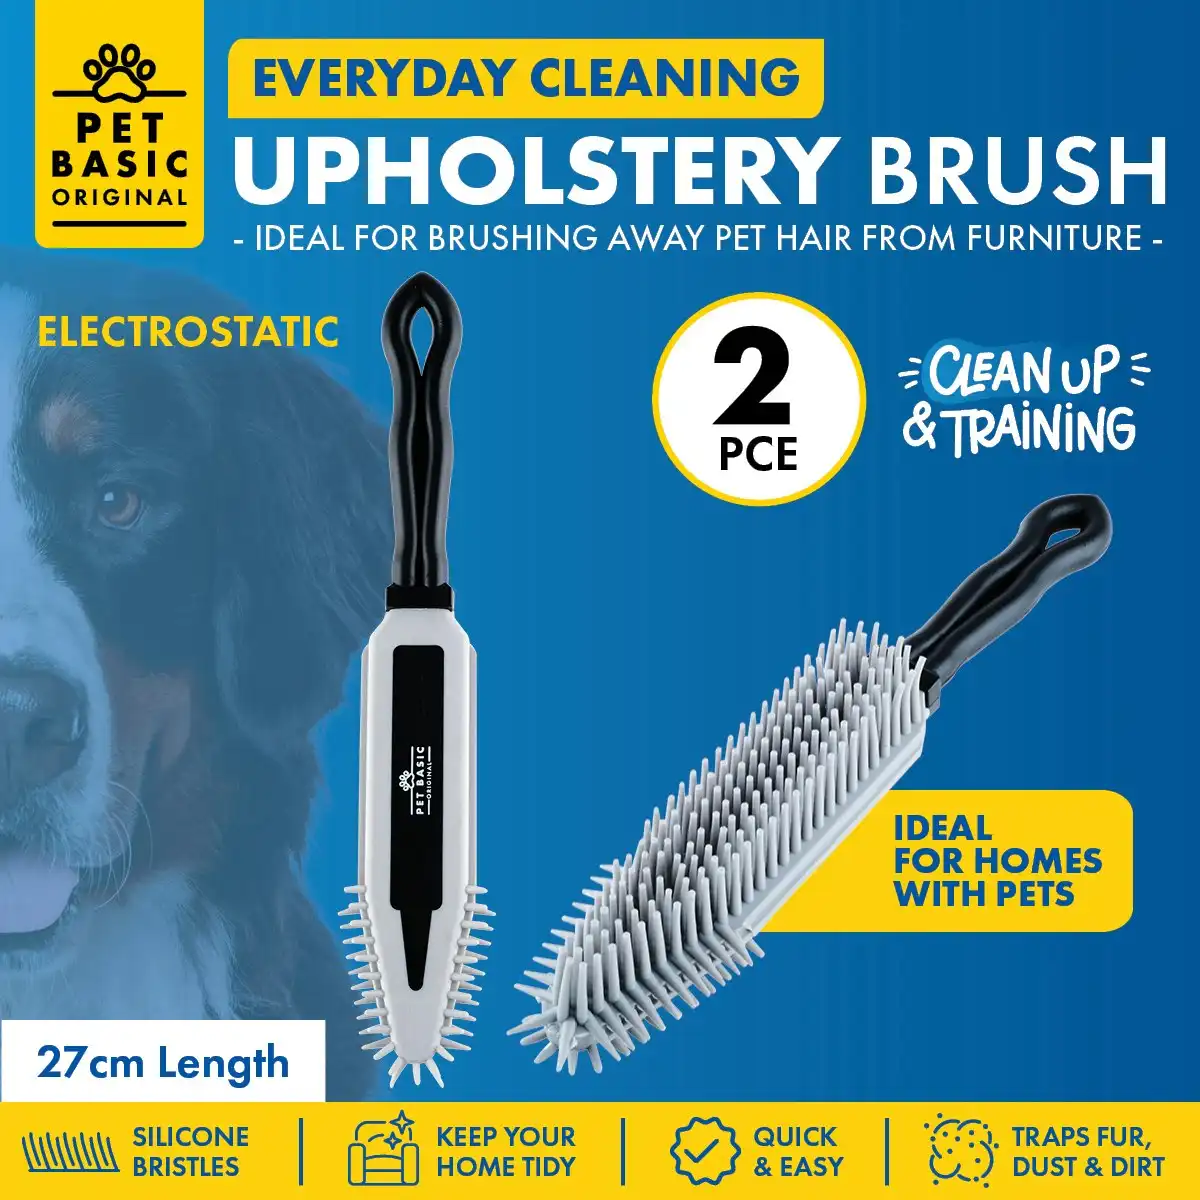 Pet Basic 2PCE Upholstery Brush Silicone Bristles Remove Excess Fur 27cm